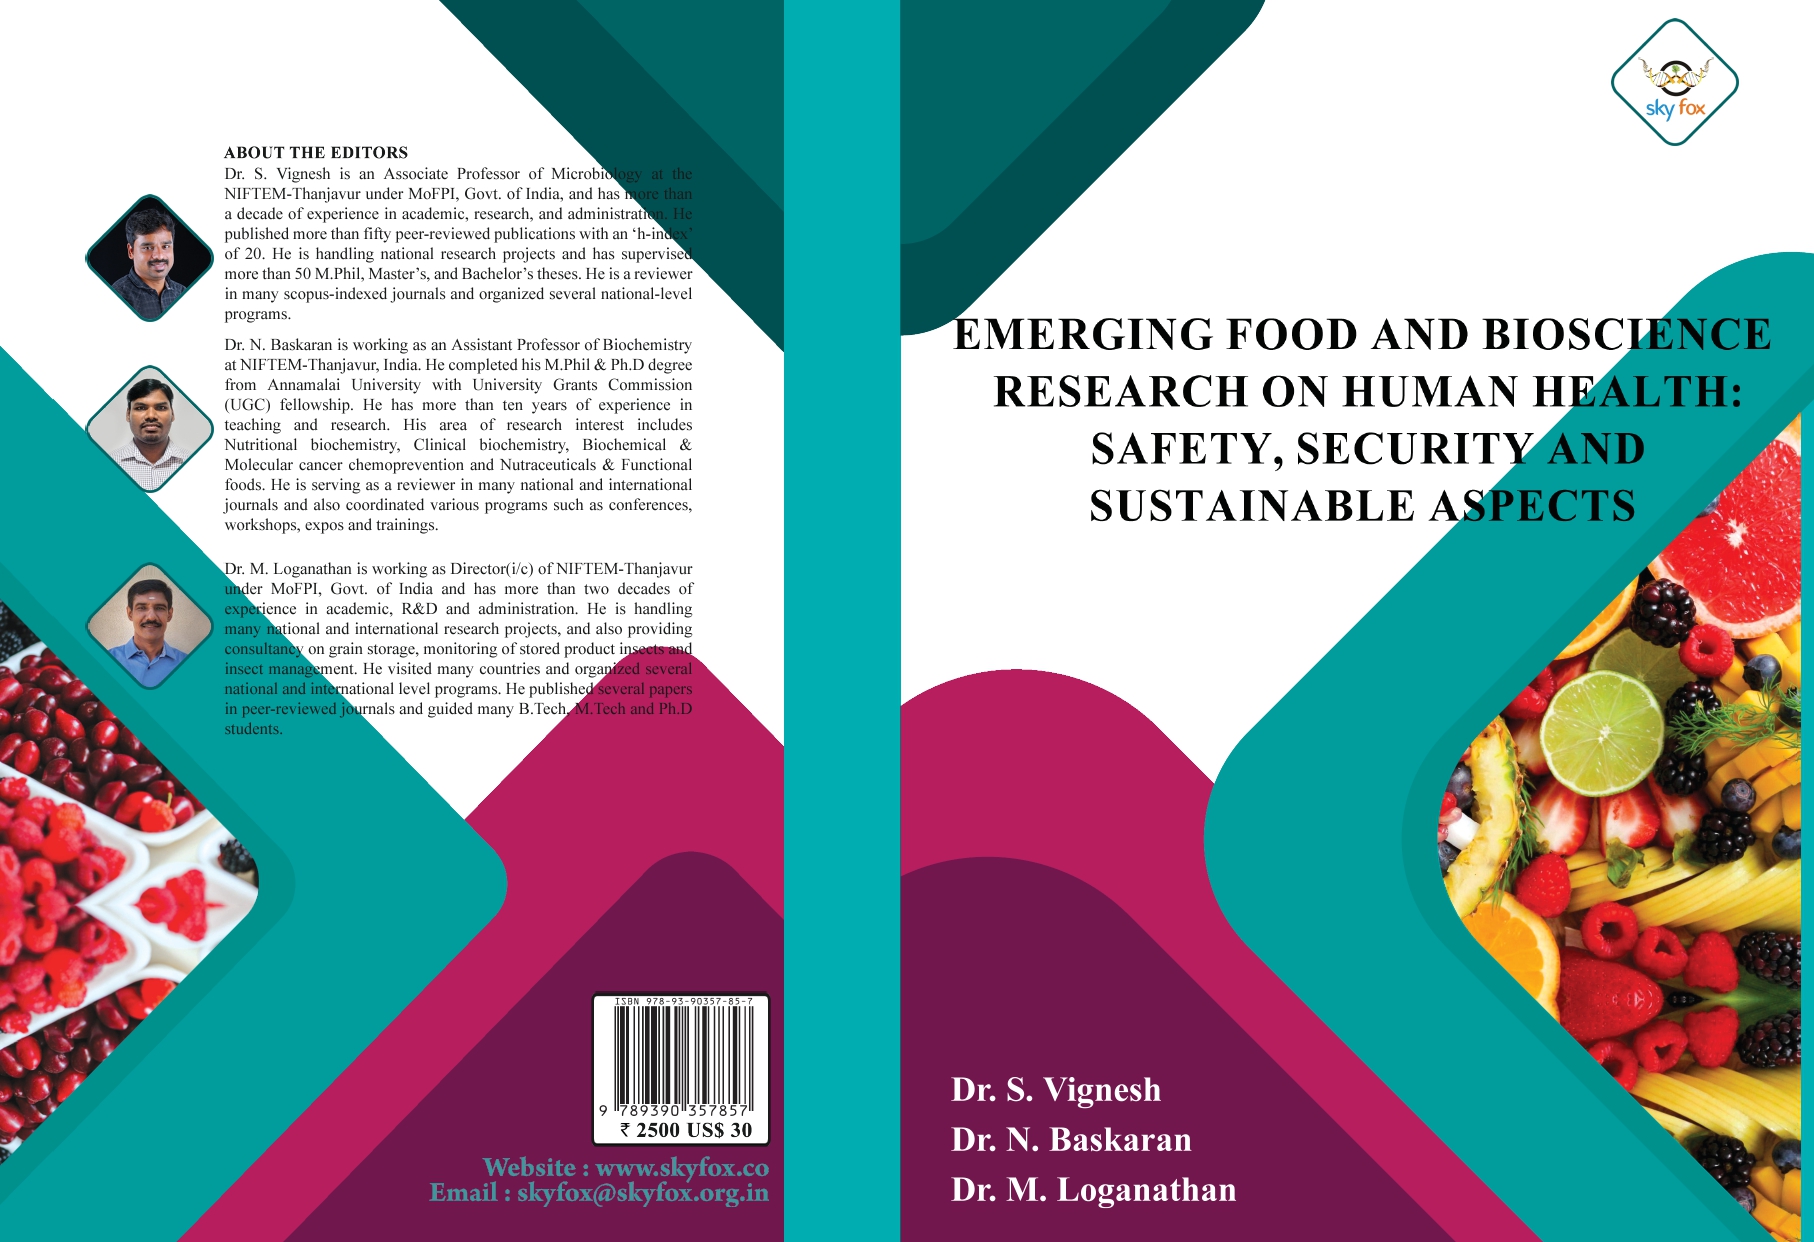 					View 2023: Emerging Food and Bioscience Research on Human Health: Safety, Security and Sustainable Aspects
				